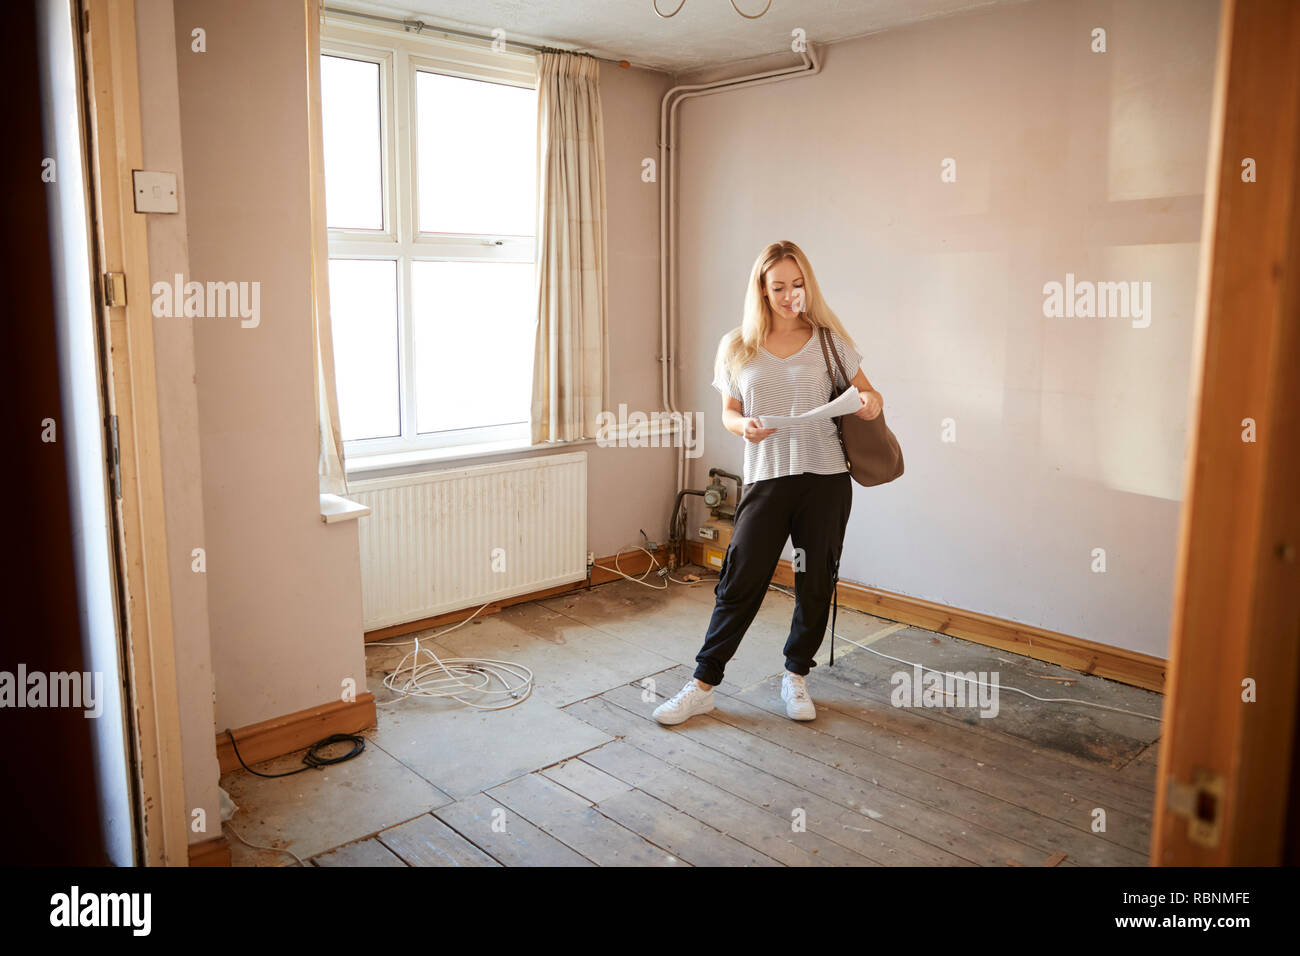 Female First Time Buyer Looking At House Survey In Room To Be Renovated Stock Photo